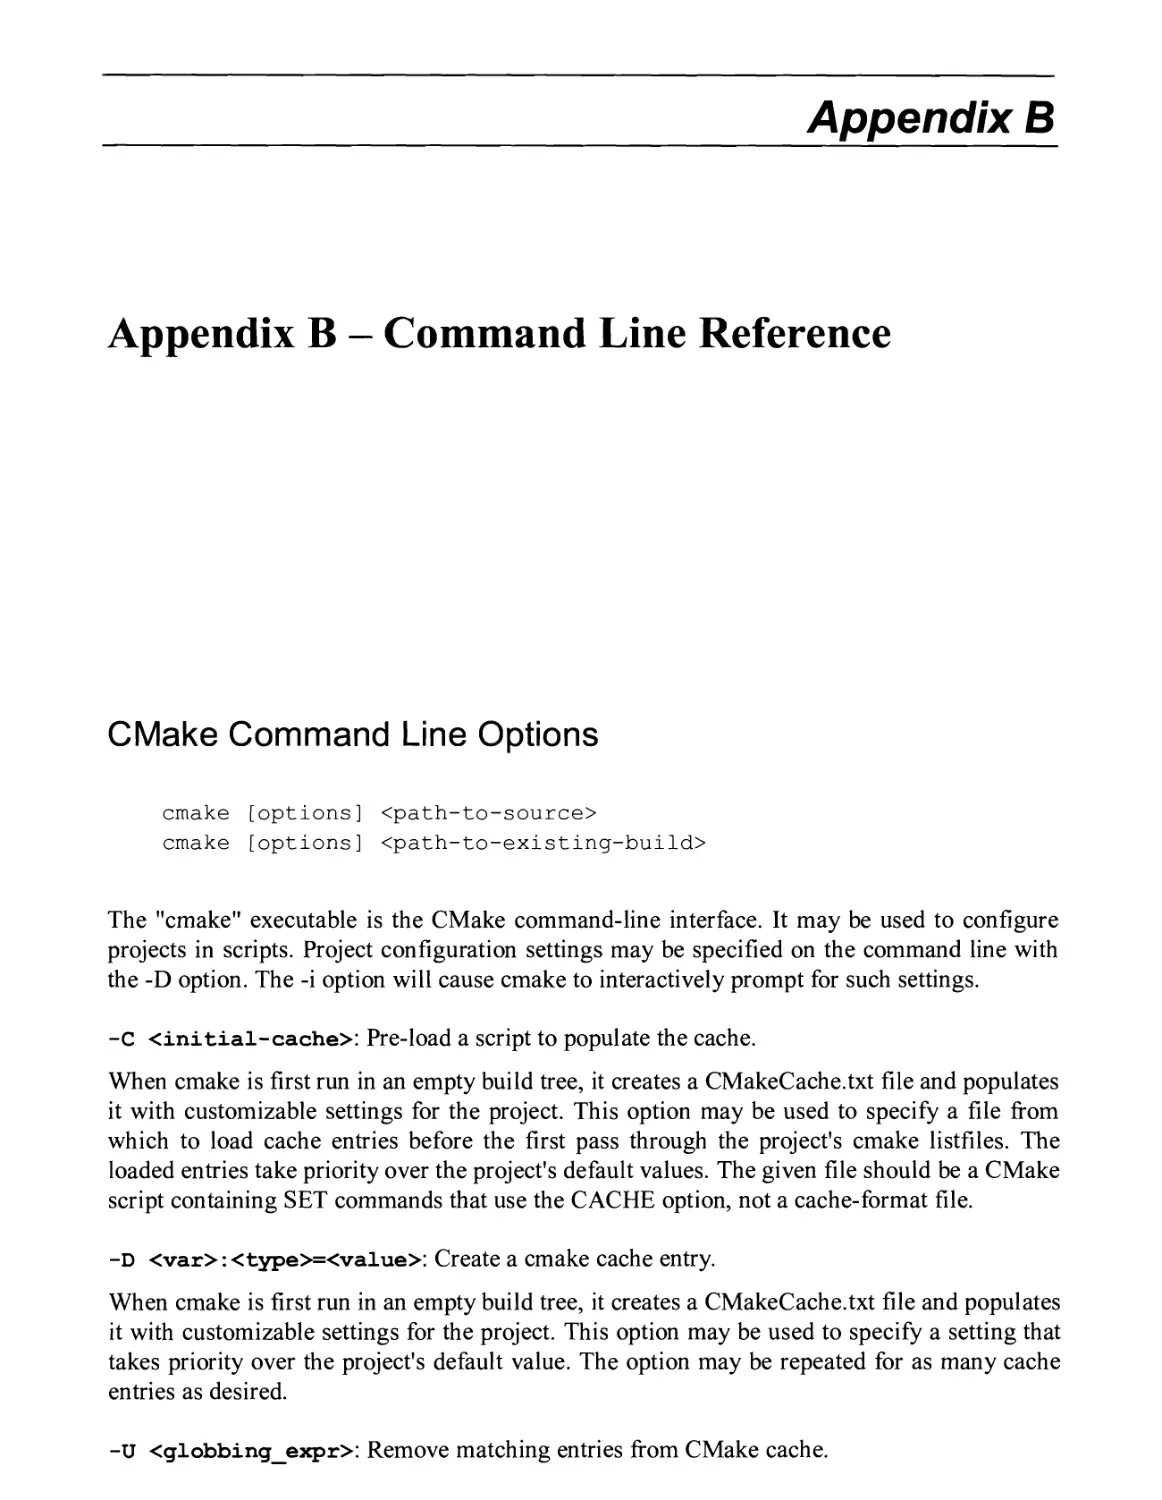 APPENDIX B - COMMAND LINE REFERENCE